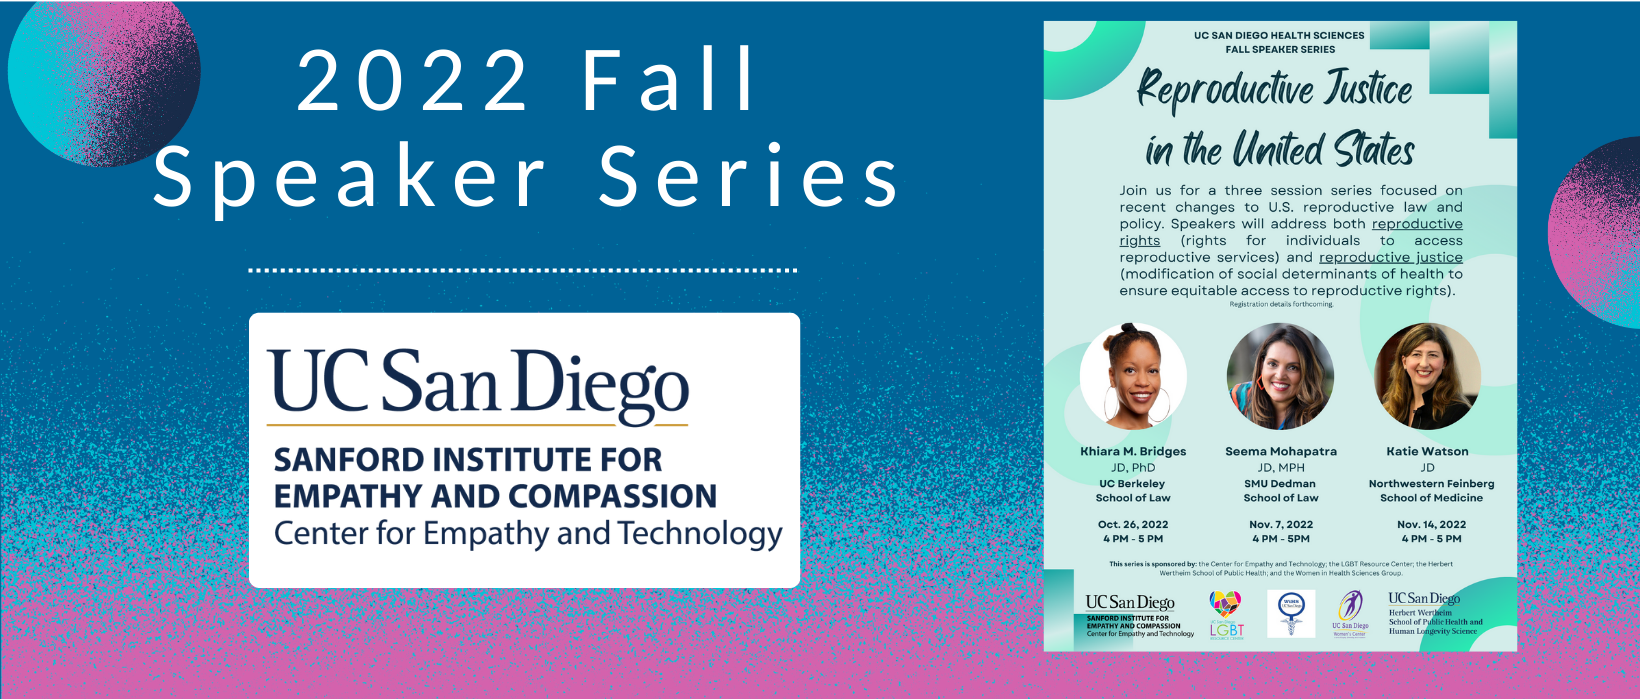 4 of 5, The UC San Diego Center for Empathy and Compassion logo appears blow the words 2022 Fall Speaker Series. To the right is a picture of the recruitment flyer for the series, showing all three series speakers: Khiara M. Bridges, Seema Mohapatra, and Katie Watson. The series is titled Reproductive Justice in the United States and states "Join us for a three session series focused on recent changes to U.S. reproductive law and policy. Speakers will address both reproductive rights (rights for individuals to access reproductive services) and reproductive justice (modification of social determinants of health to ensure equitable access to reproductive rights). 